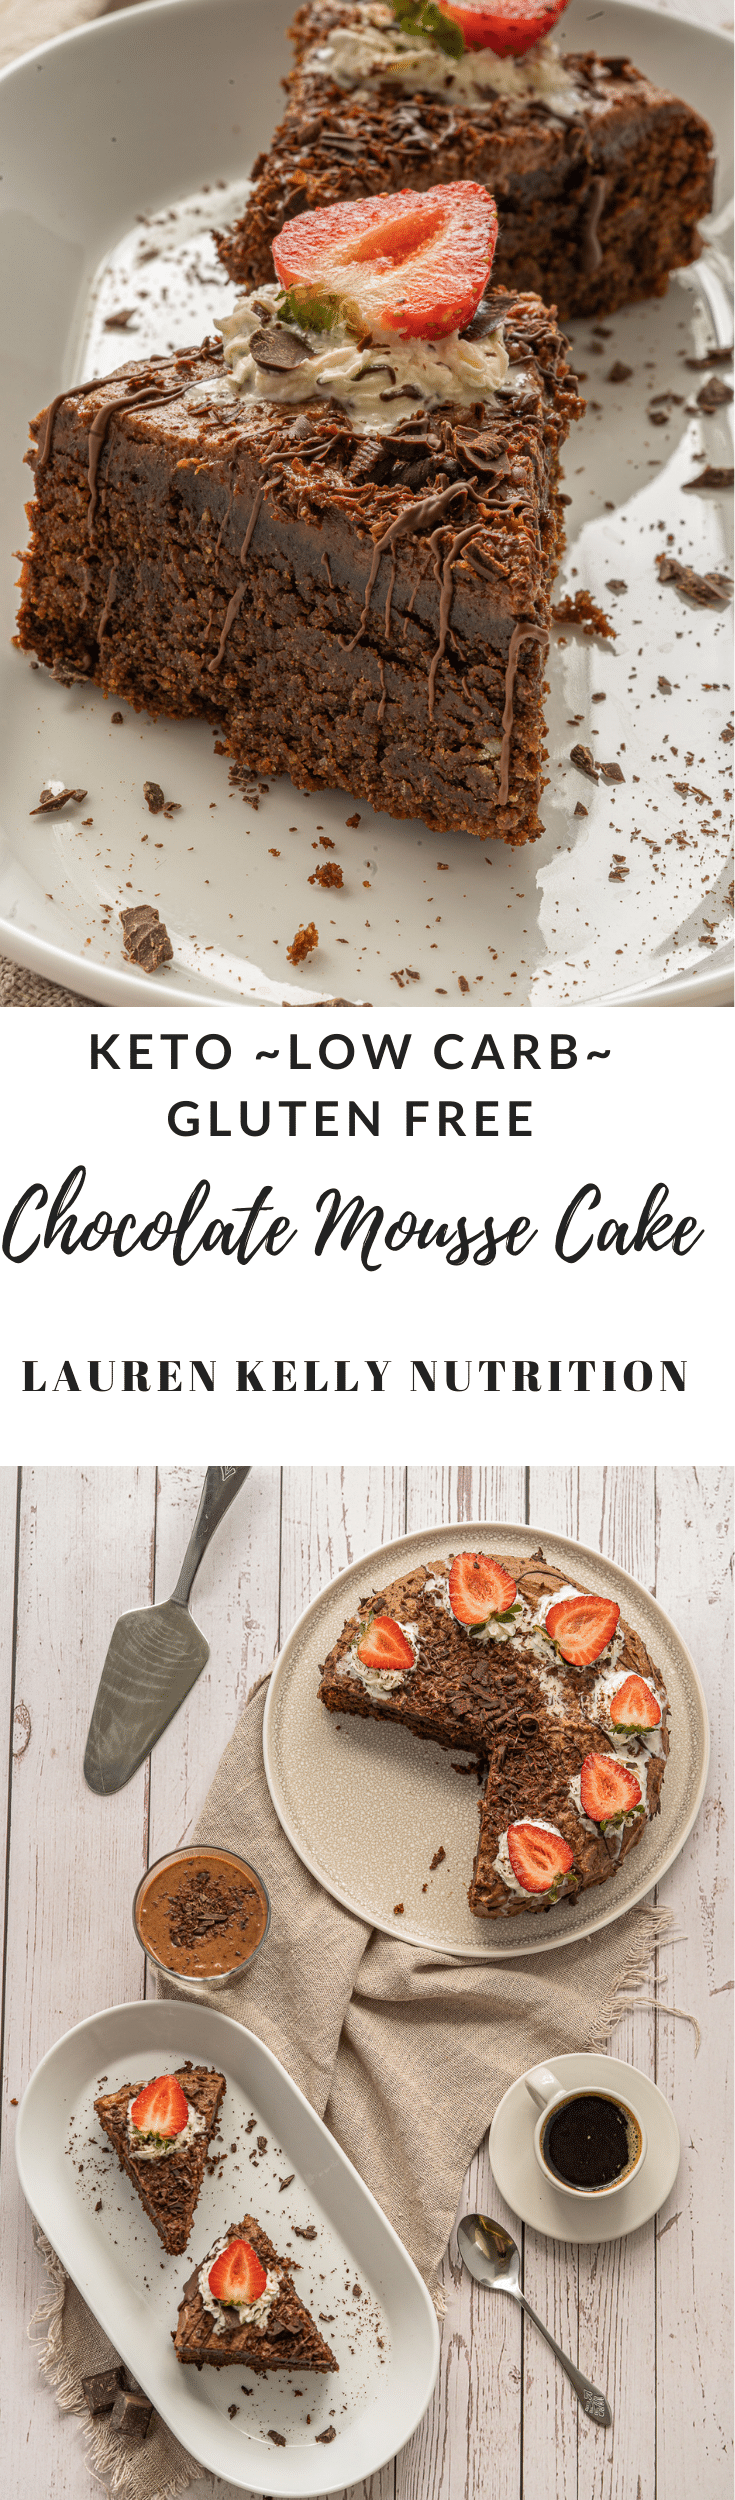 Smooth, rich and decadent, this Low Carb Almond Flour Cake will satisfy the biggest chocolate lovers! It's also gluten free, grain free, sugar free and keto friendly.